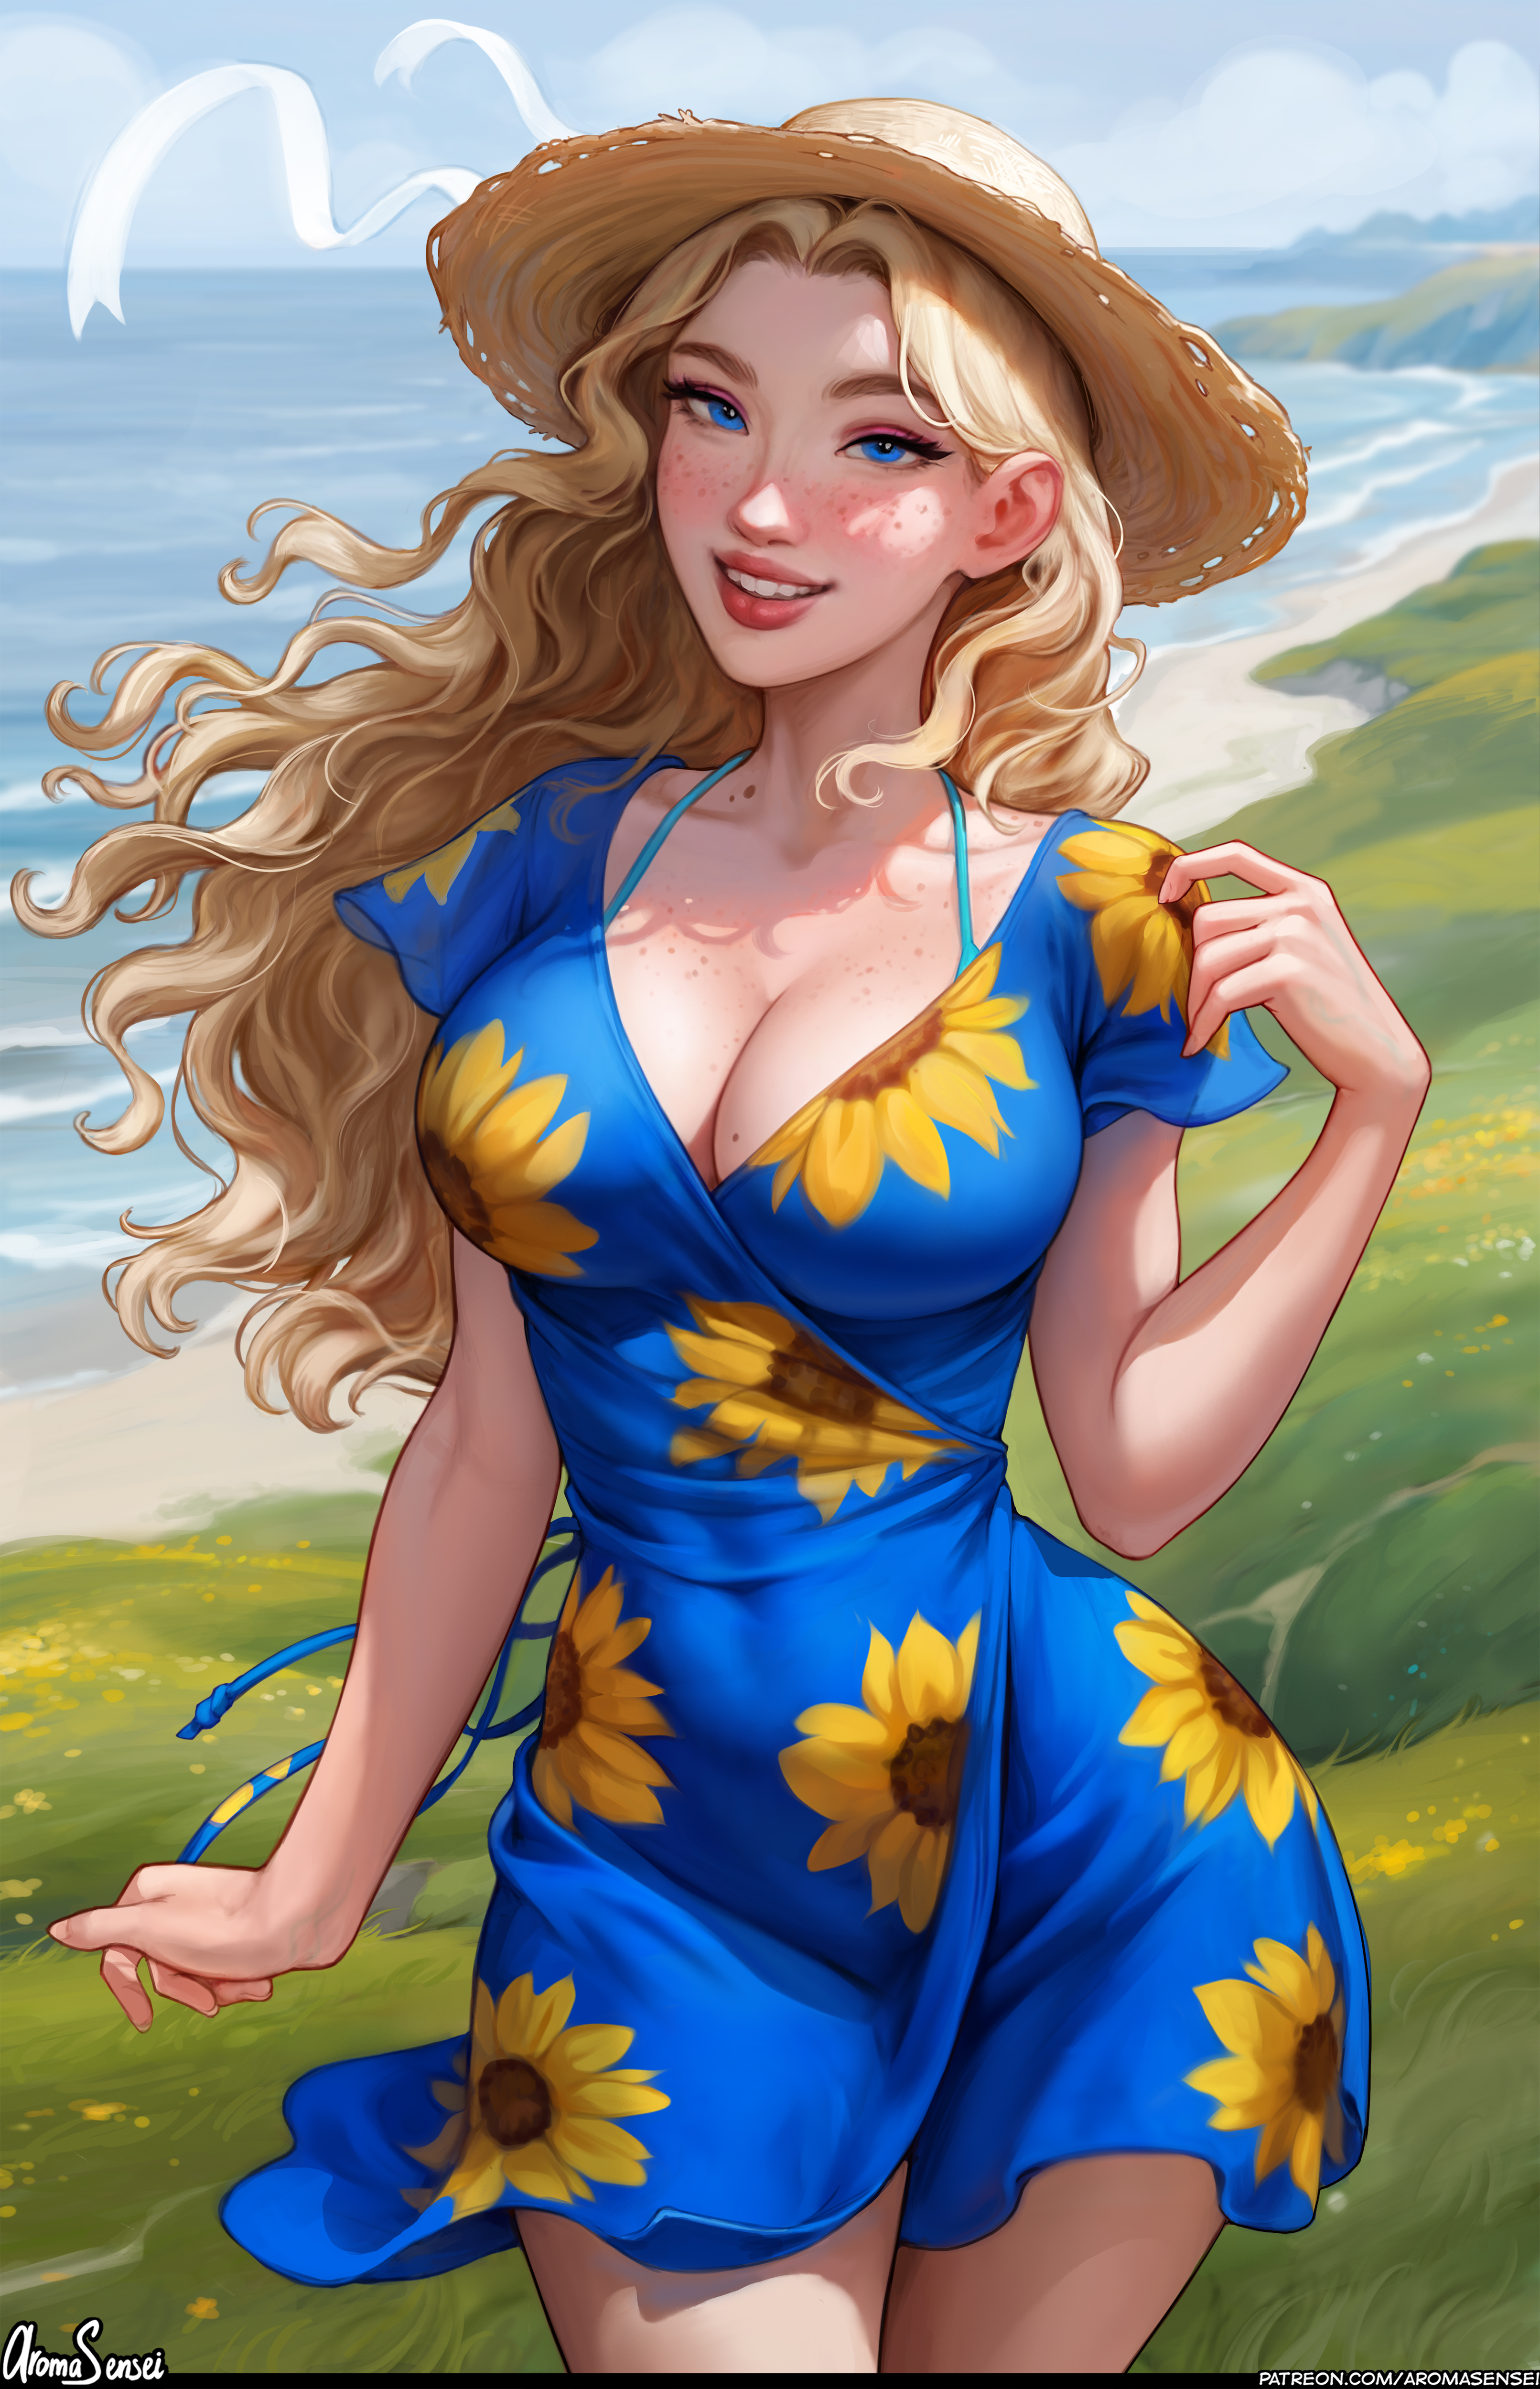 General 3223x5000 Haley (Stardew Valley) Stardew Valley video game girls blonde artwork drawing fan art Aroma Sensei cleavage dress blue eyes big boobs hat women with hats standing smiling outdoors women outdoors video games sunlight collarbone long hair signature water looking at viewer skinny hair blowing in the wind wind portrait display